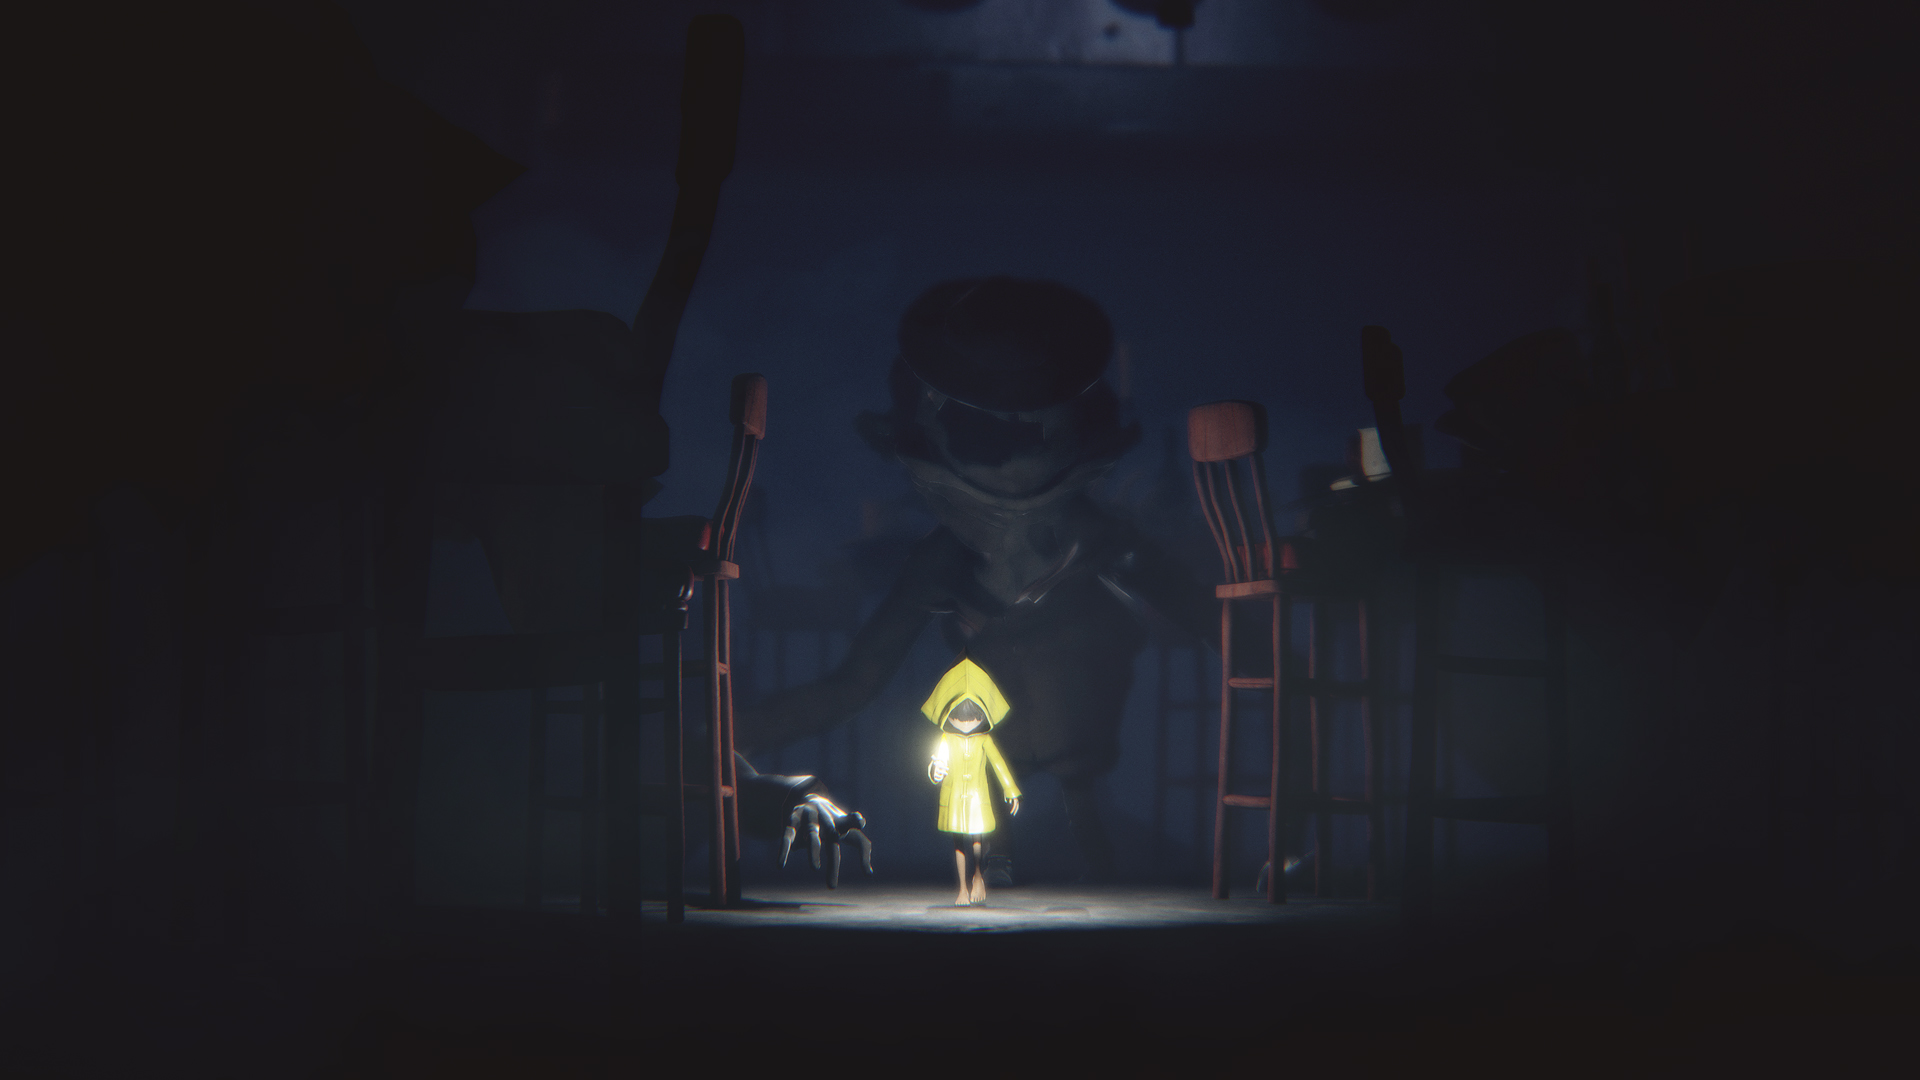 Little Nightmares- Six needs help to escape safely.